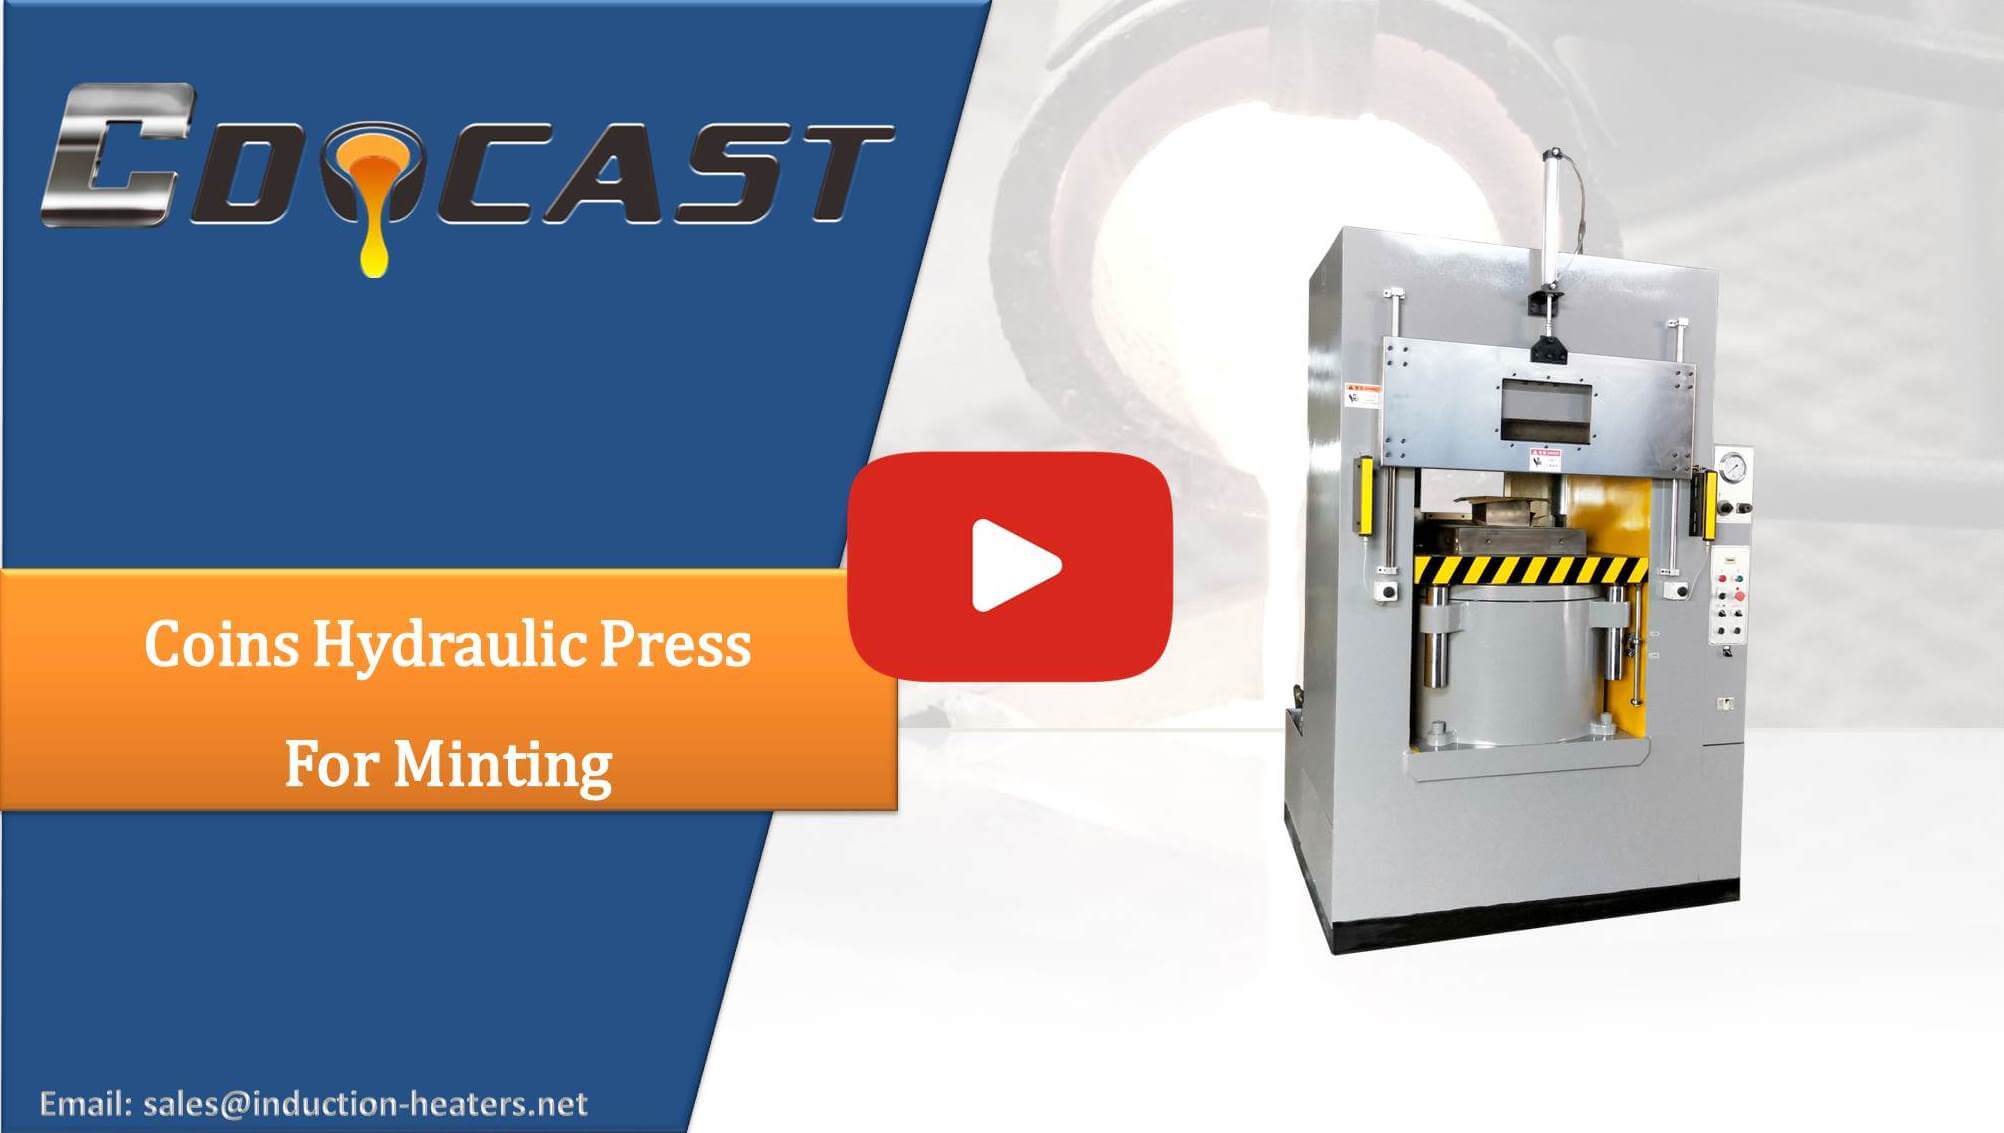 Coins Hydraulic Press For Minting